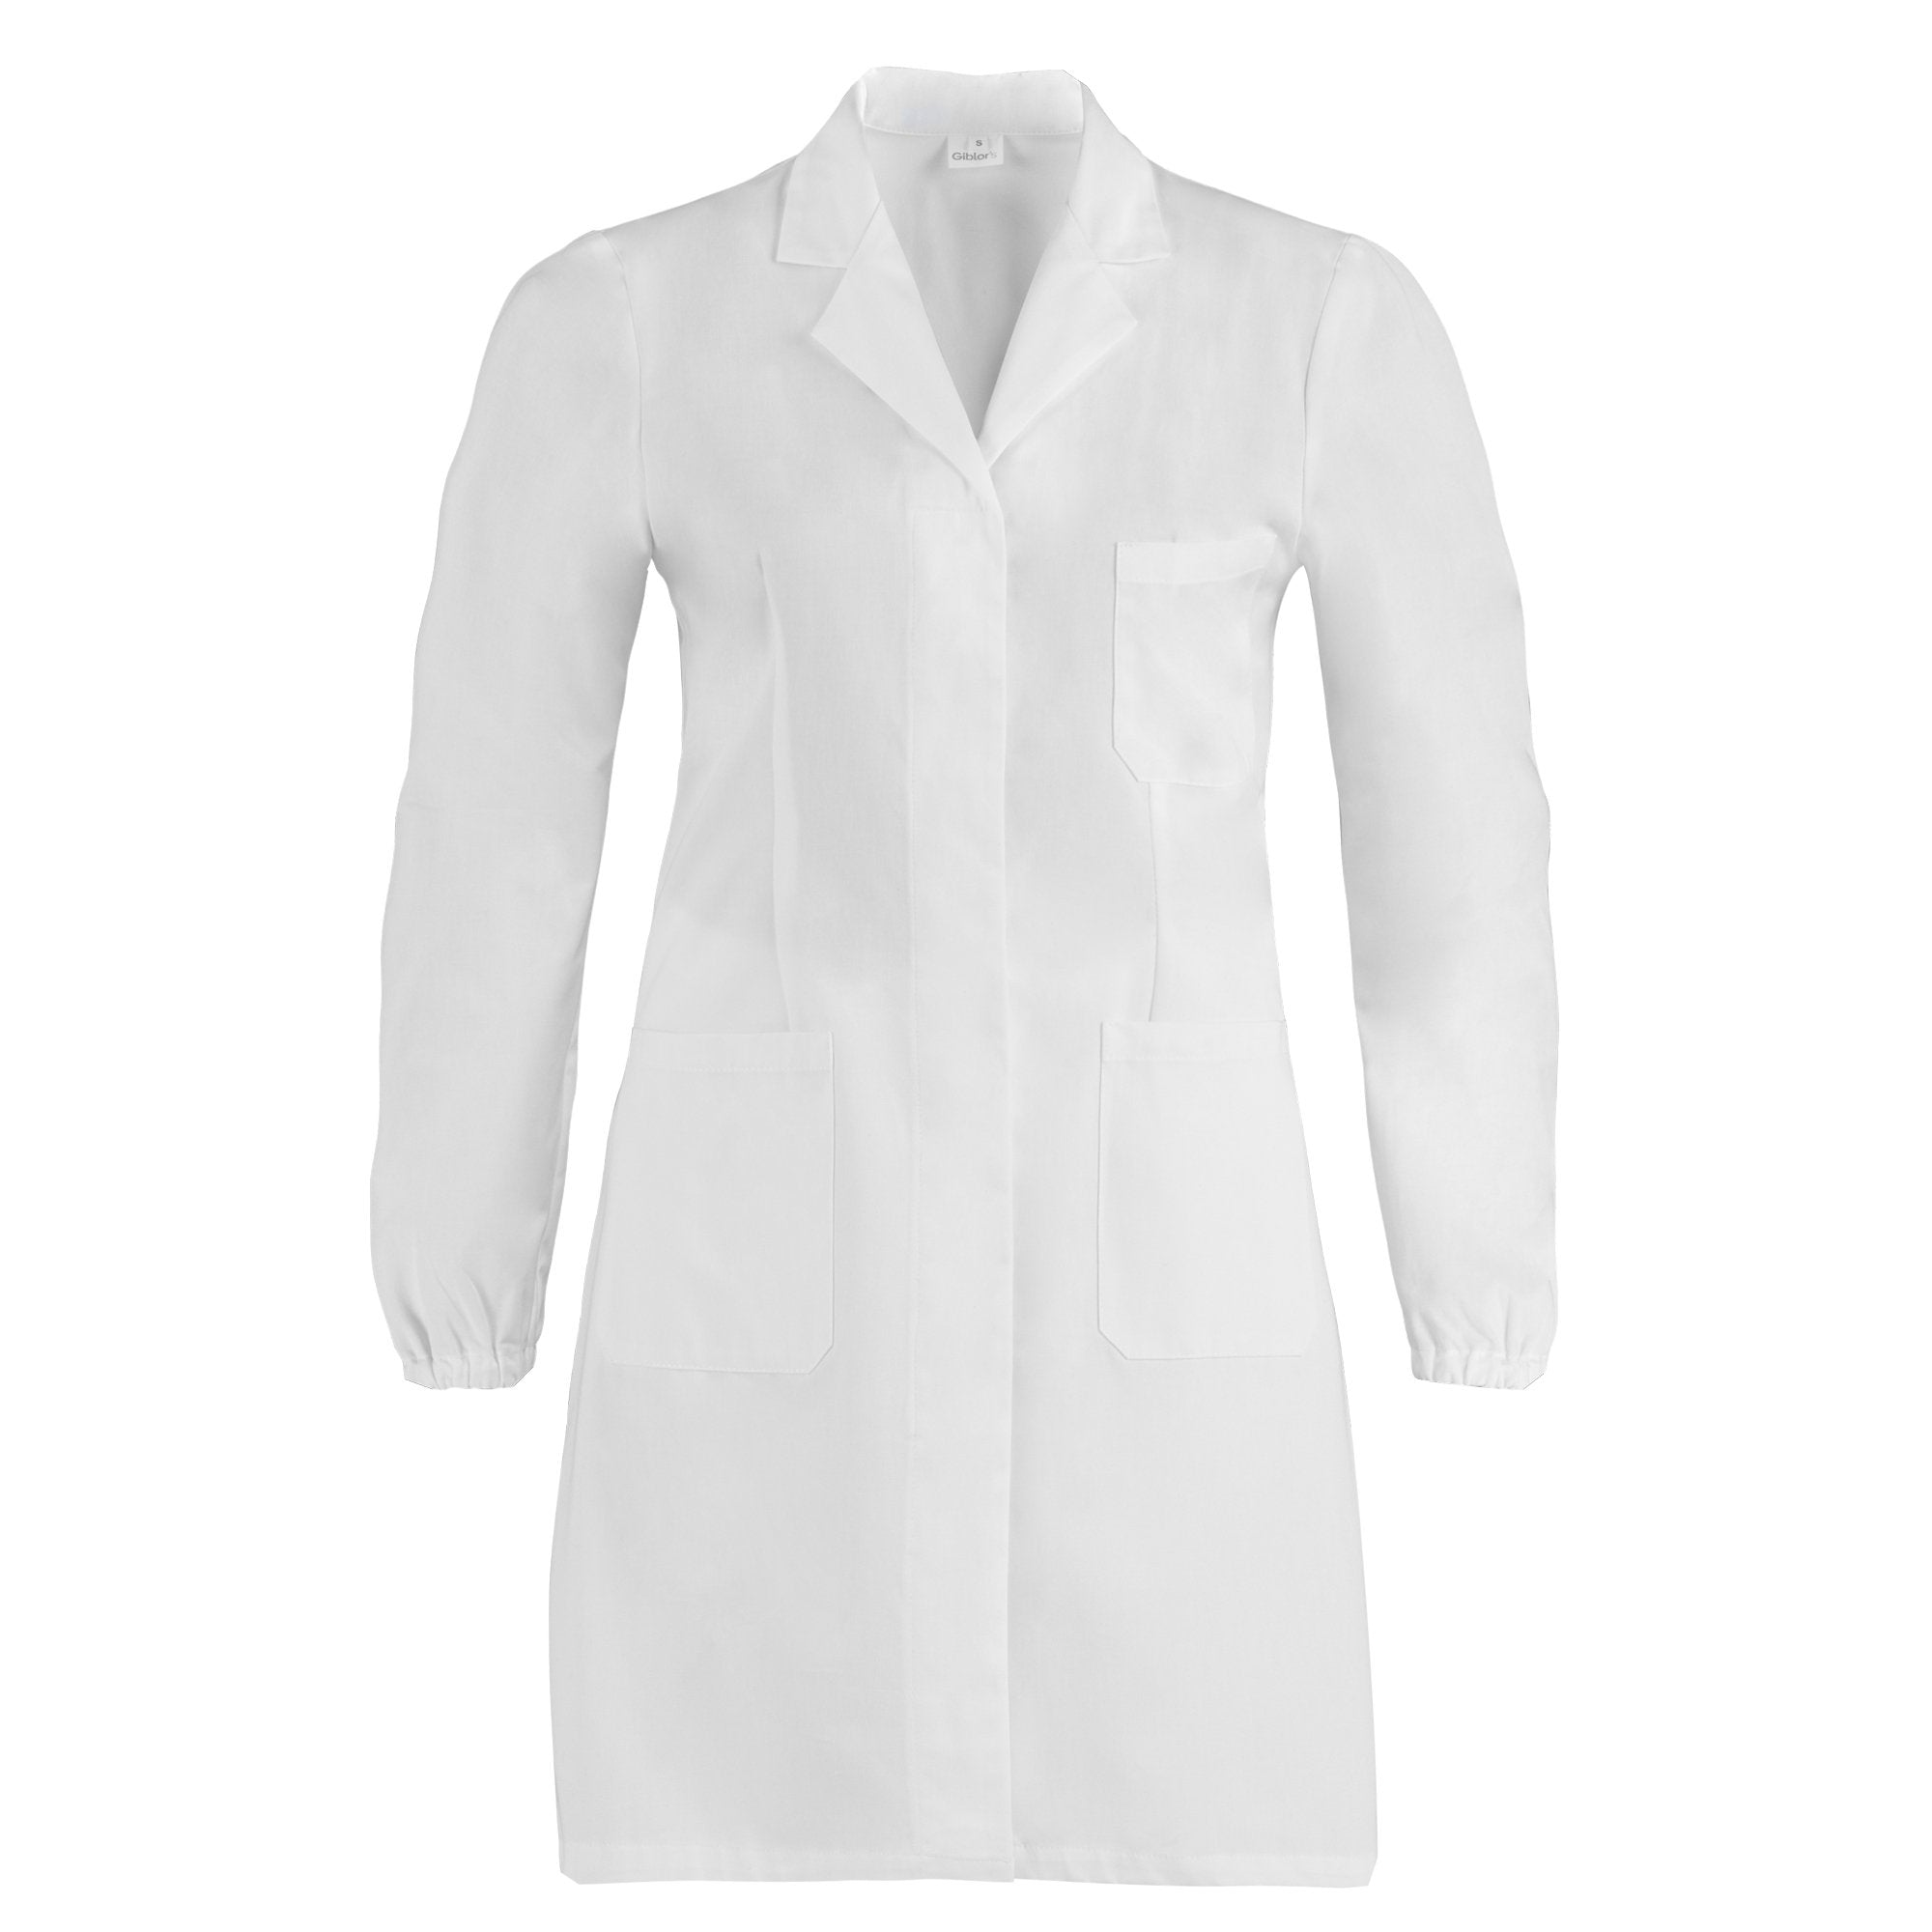 giblor's-camice-isotta-donna-tg-l-bianco